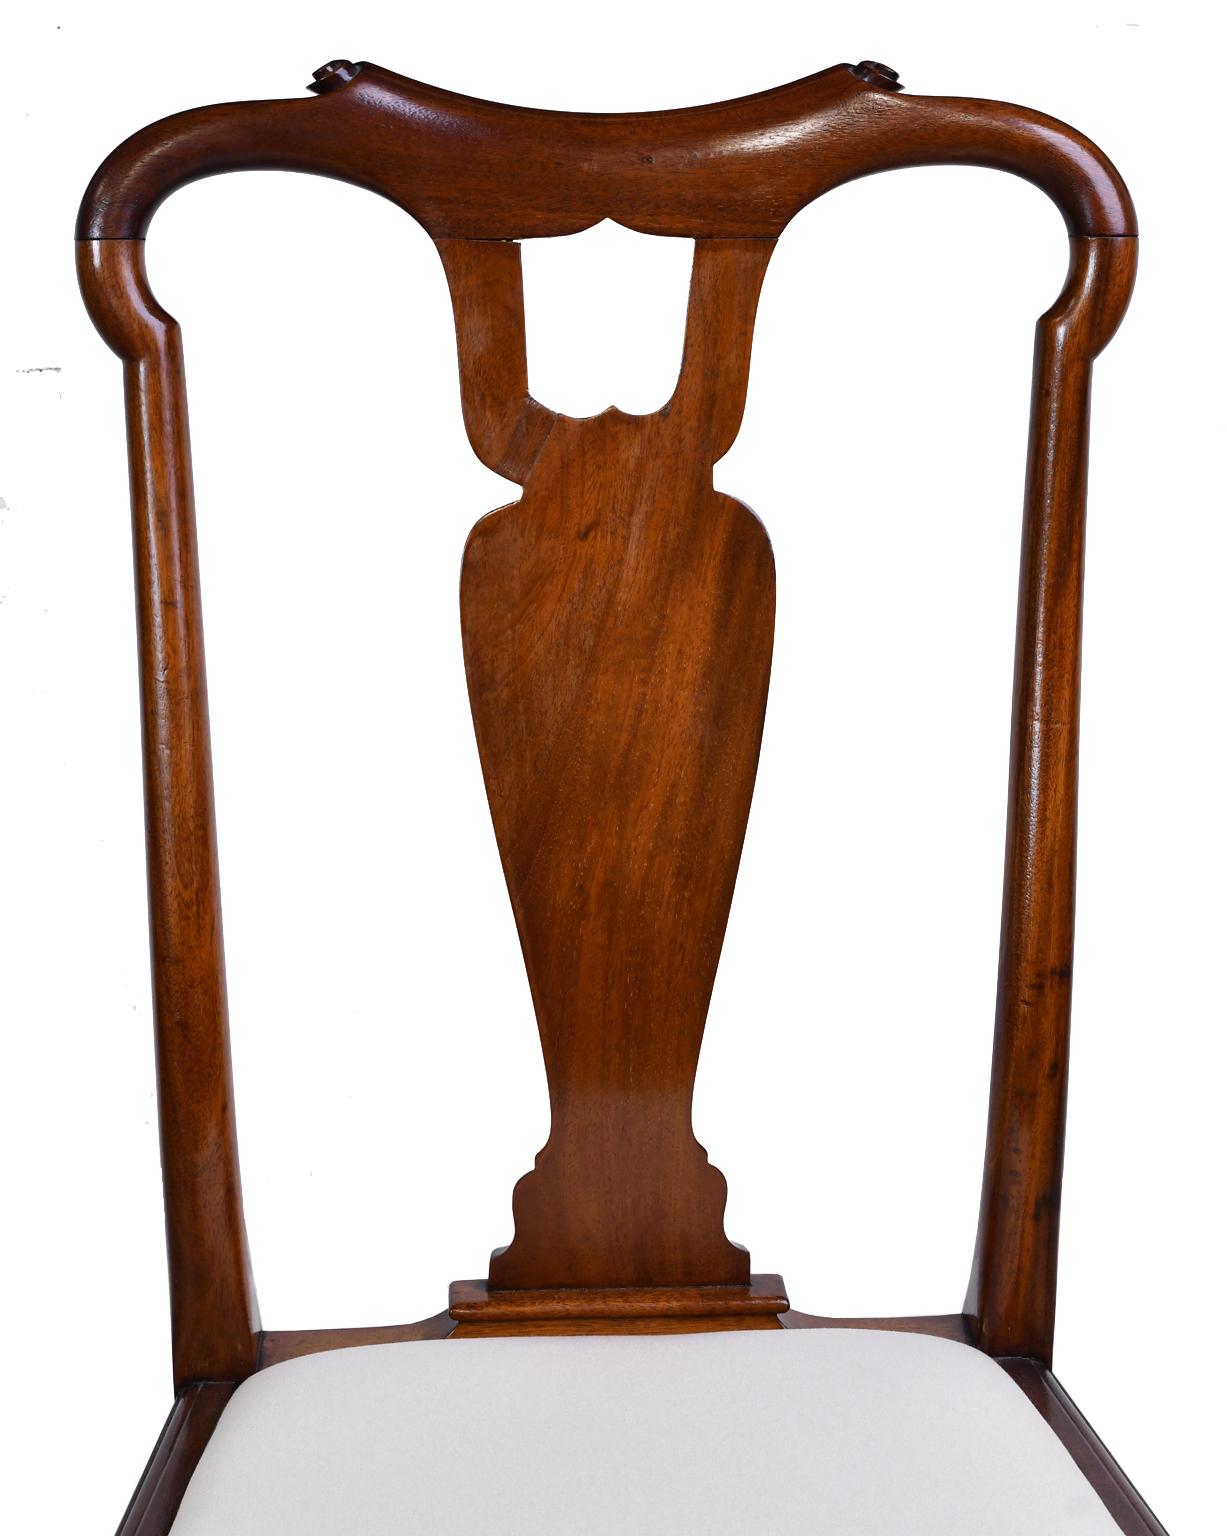 Queen Anne-Style Fiddle-Back Chair in Mahogany w/ Upholstered Slip Seat, c 1880 In Good Condition For Sale In Miami, FL